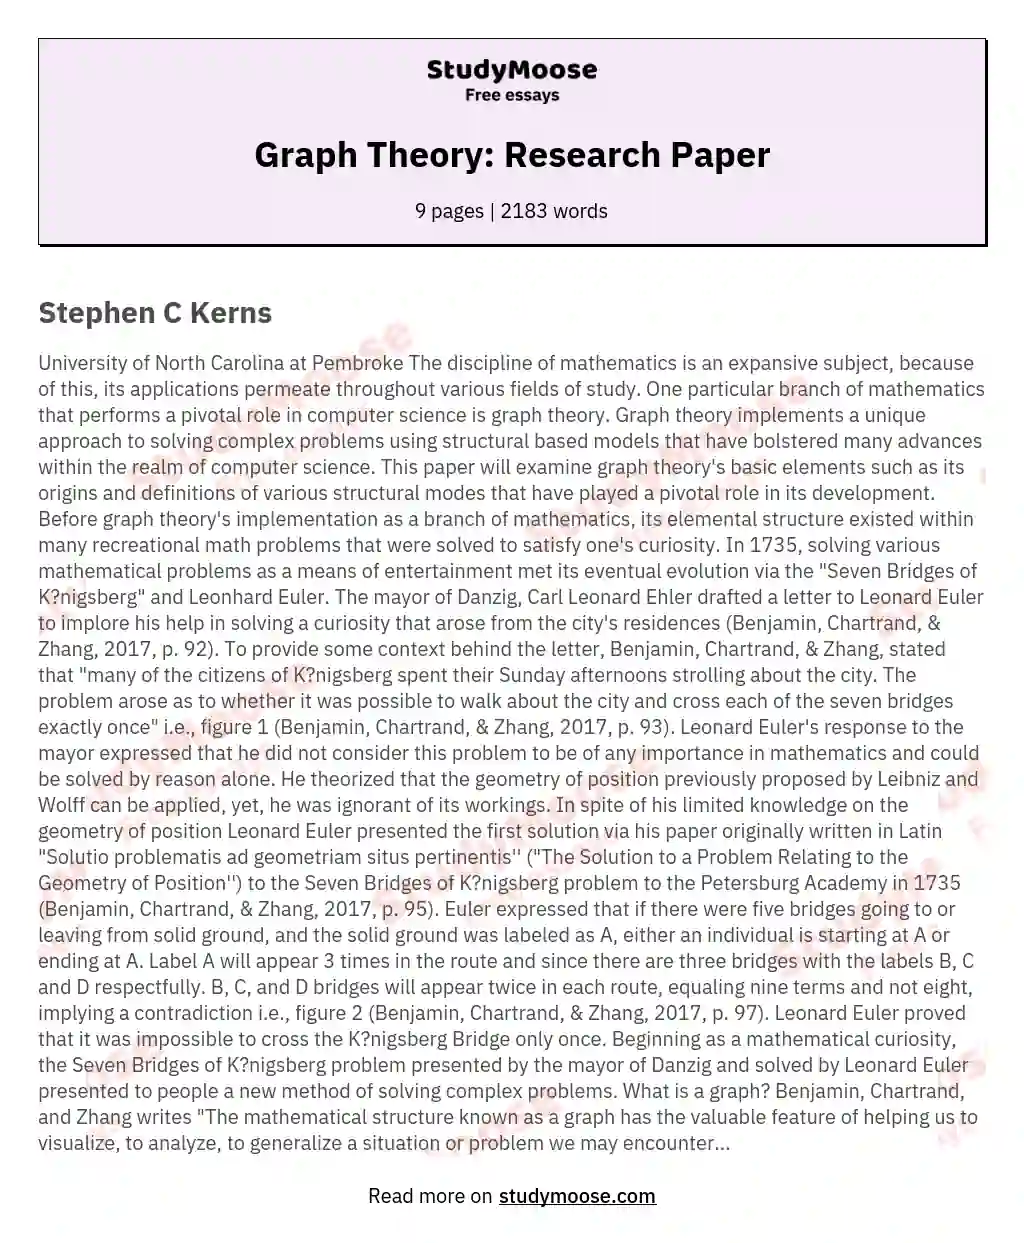 Graph Theory: Research Paper essay